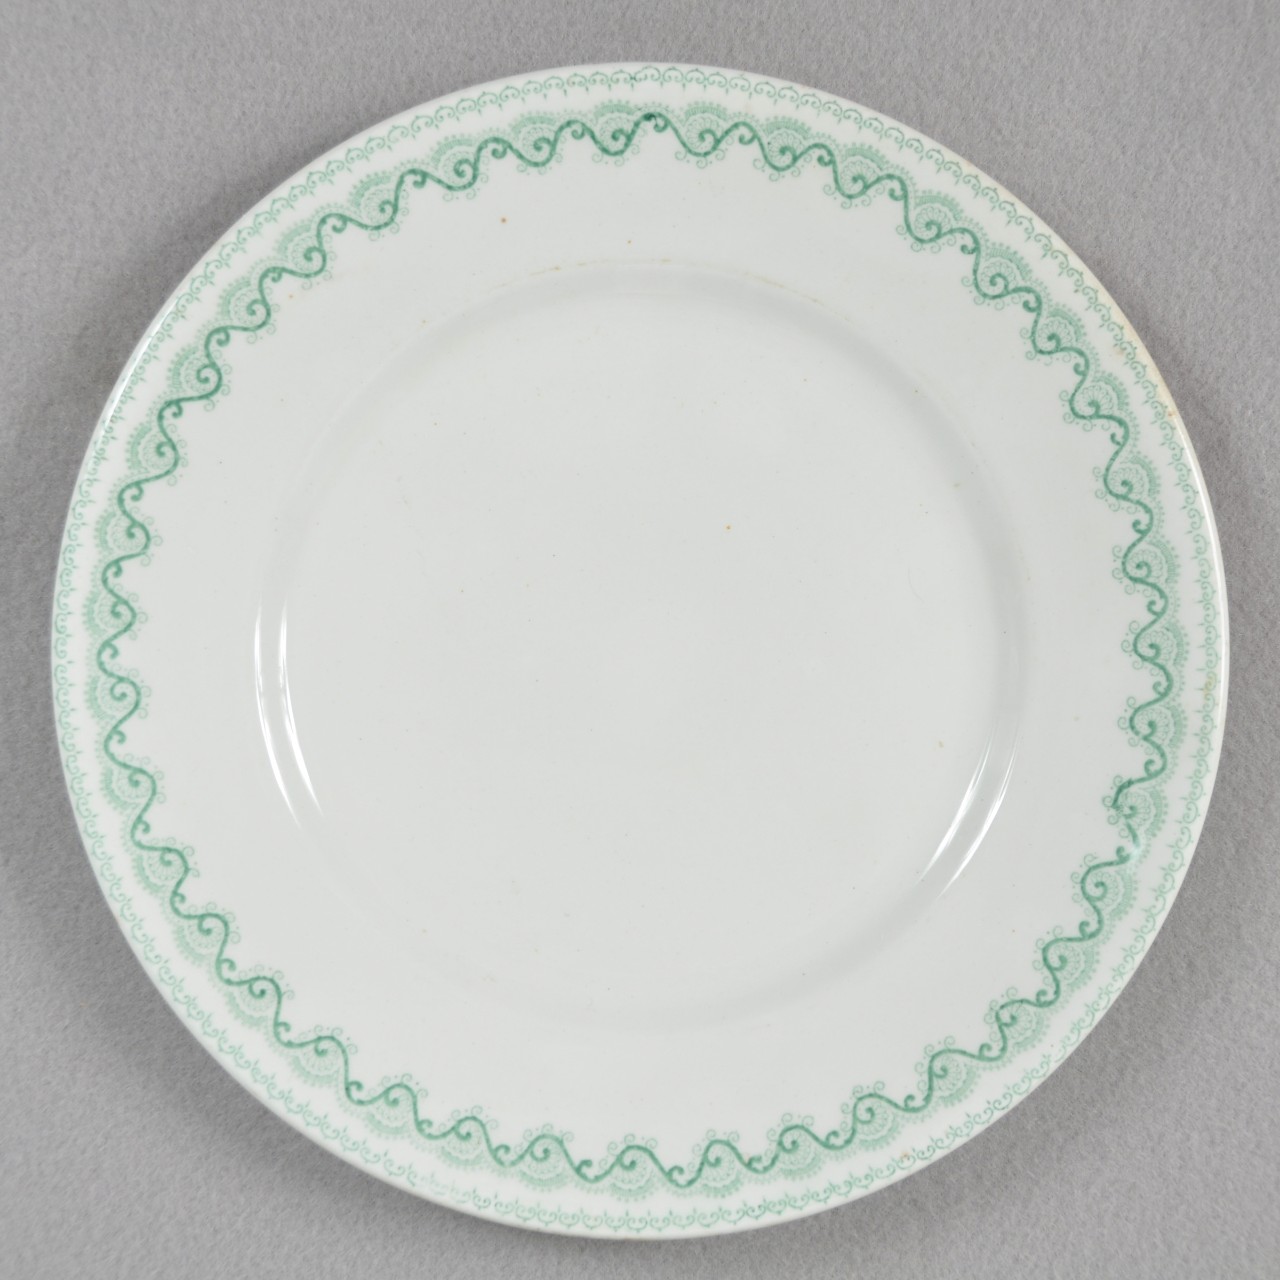 <p>A white glazed stoneware plate recovered from USS San Diego with a continuous green scrolling pattern around the border.</p>